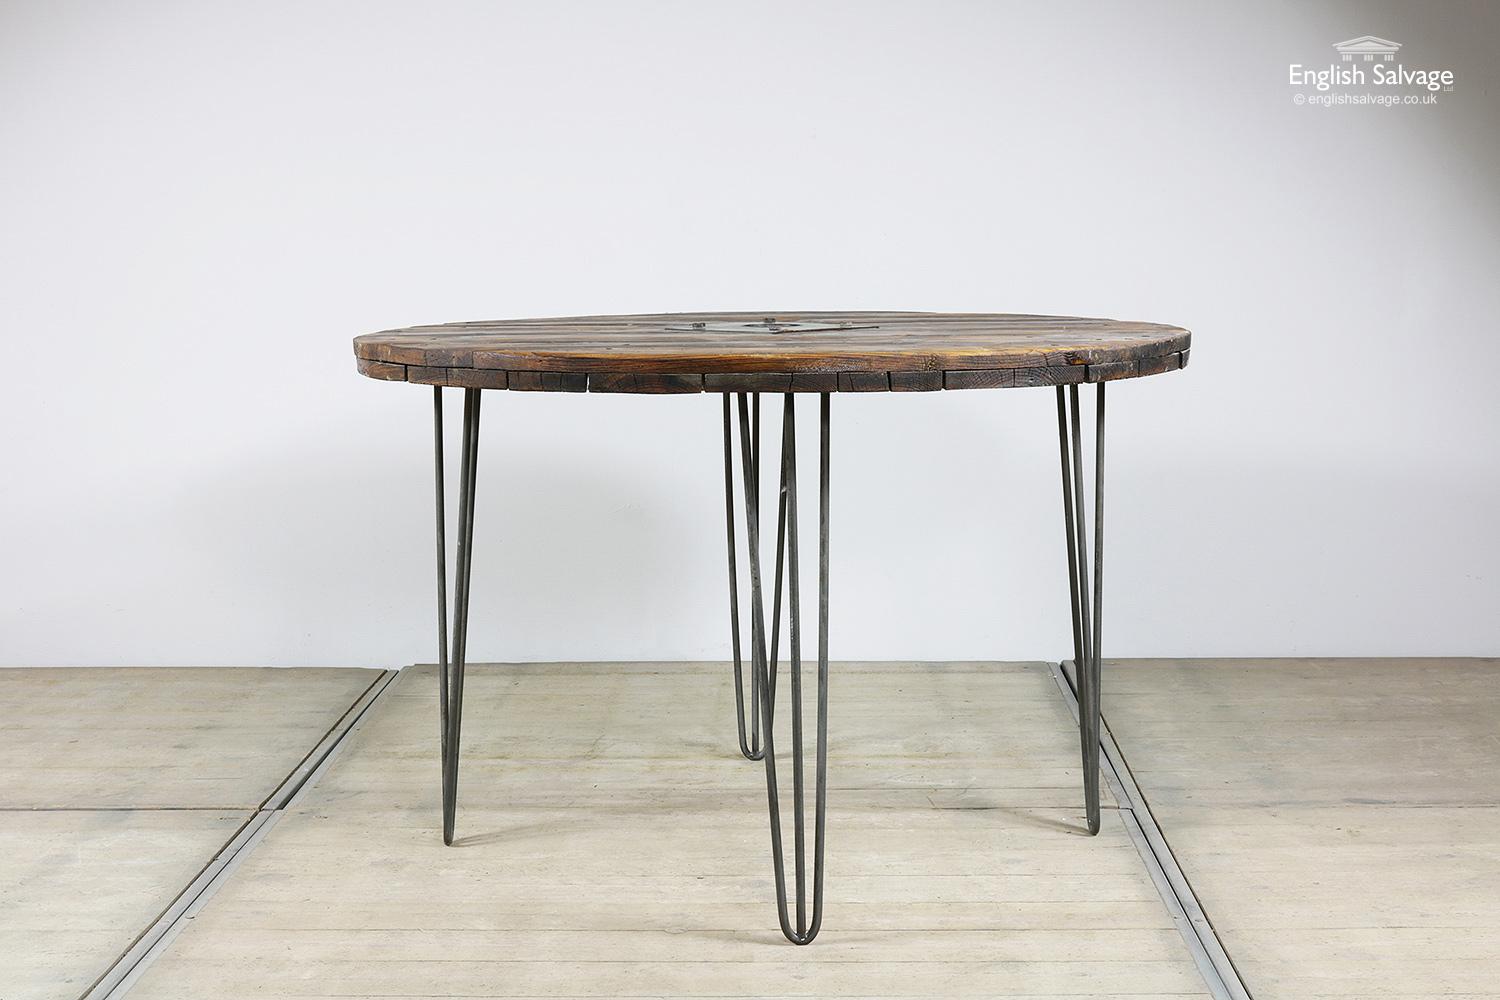 European Vintage Wooden Spool Top Circular Table, 20th Century For Sale